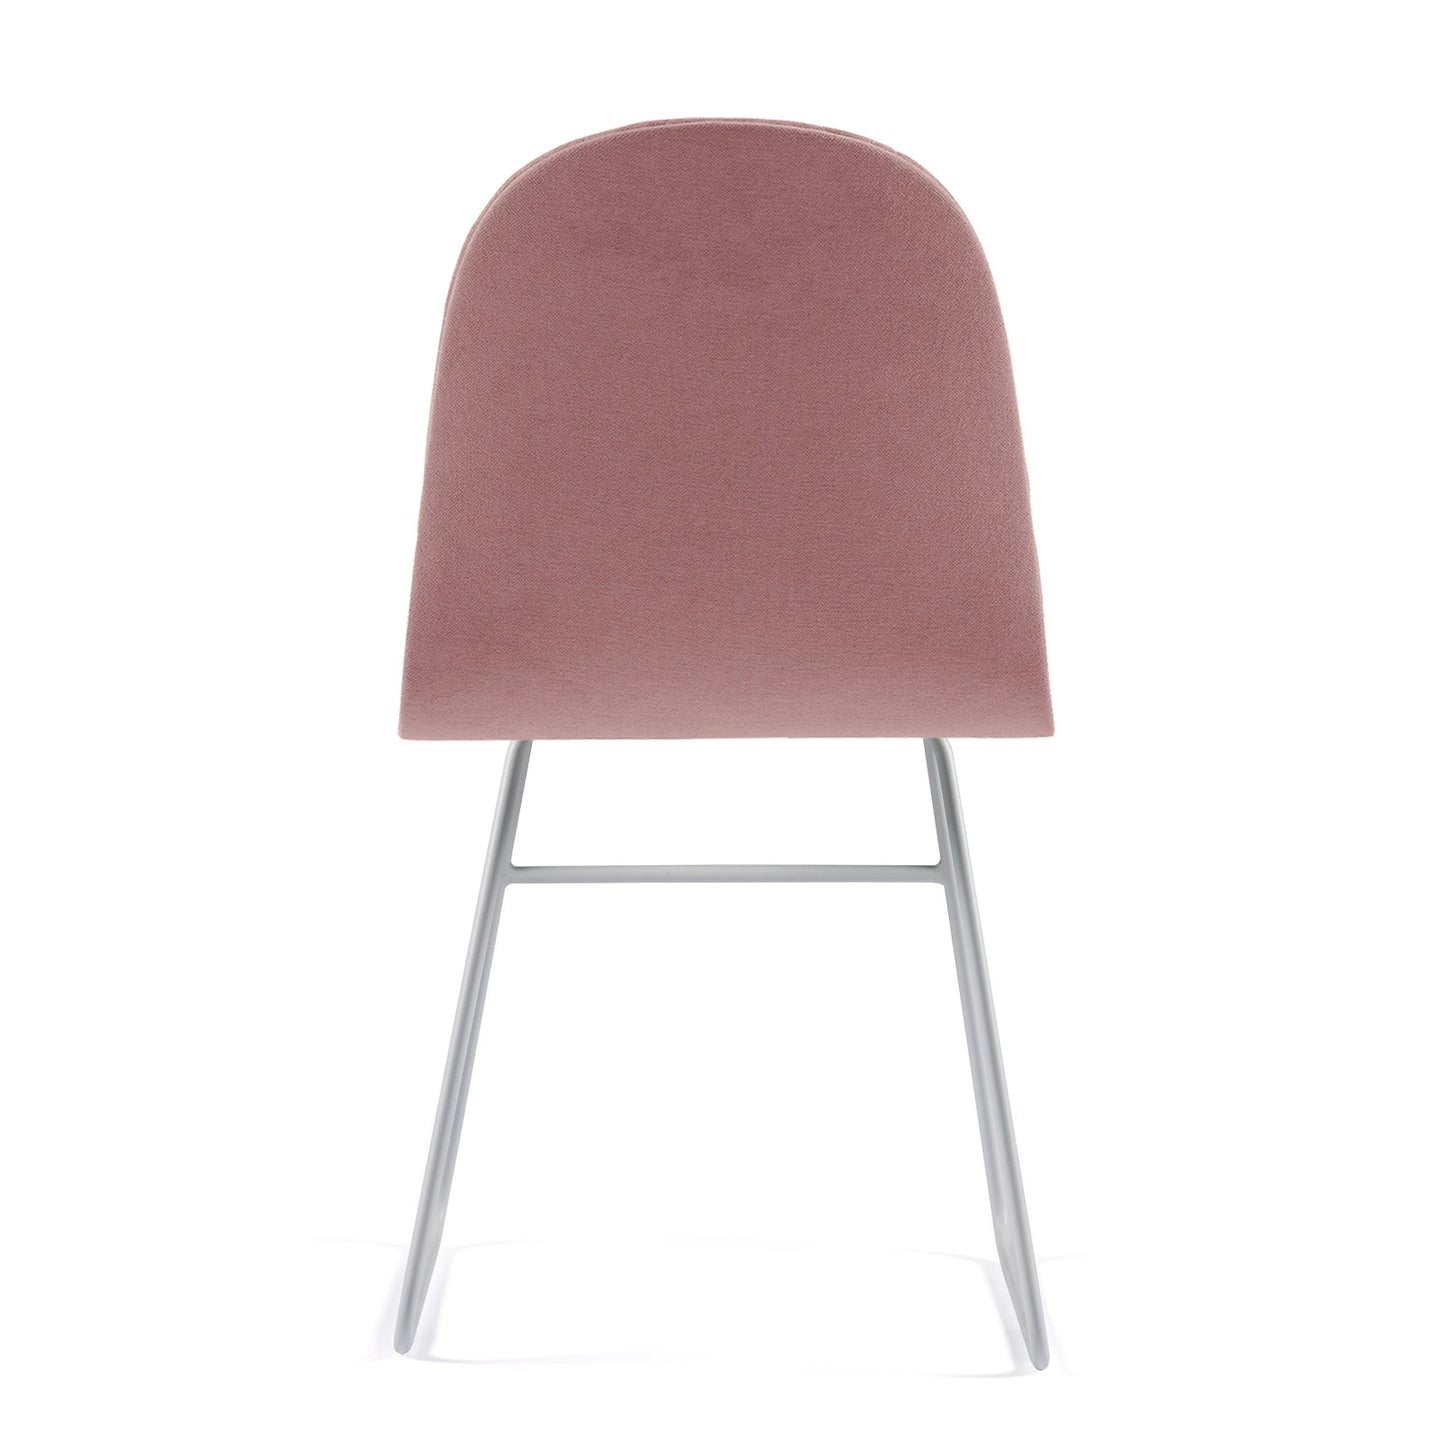 Chair Mannequin 02 - Dusty Rose